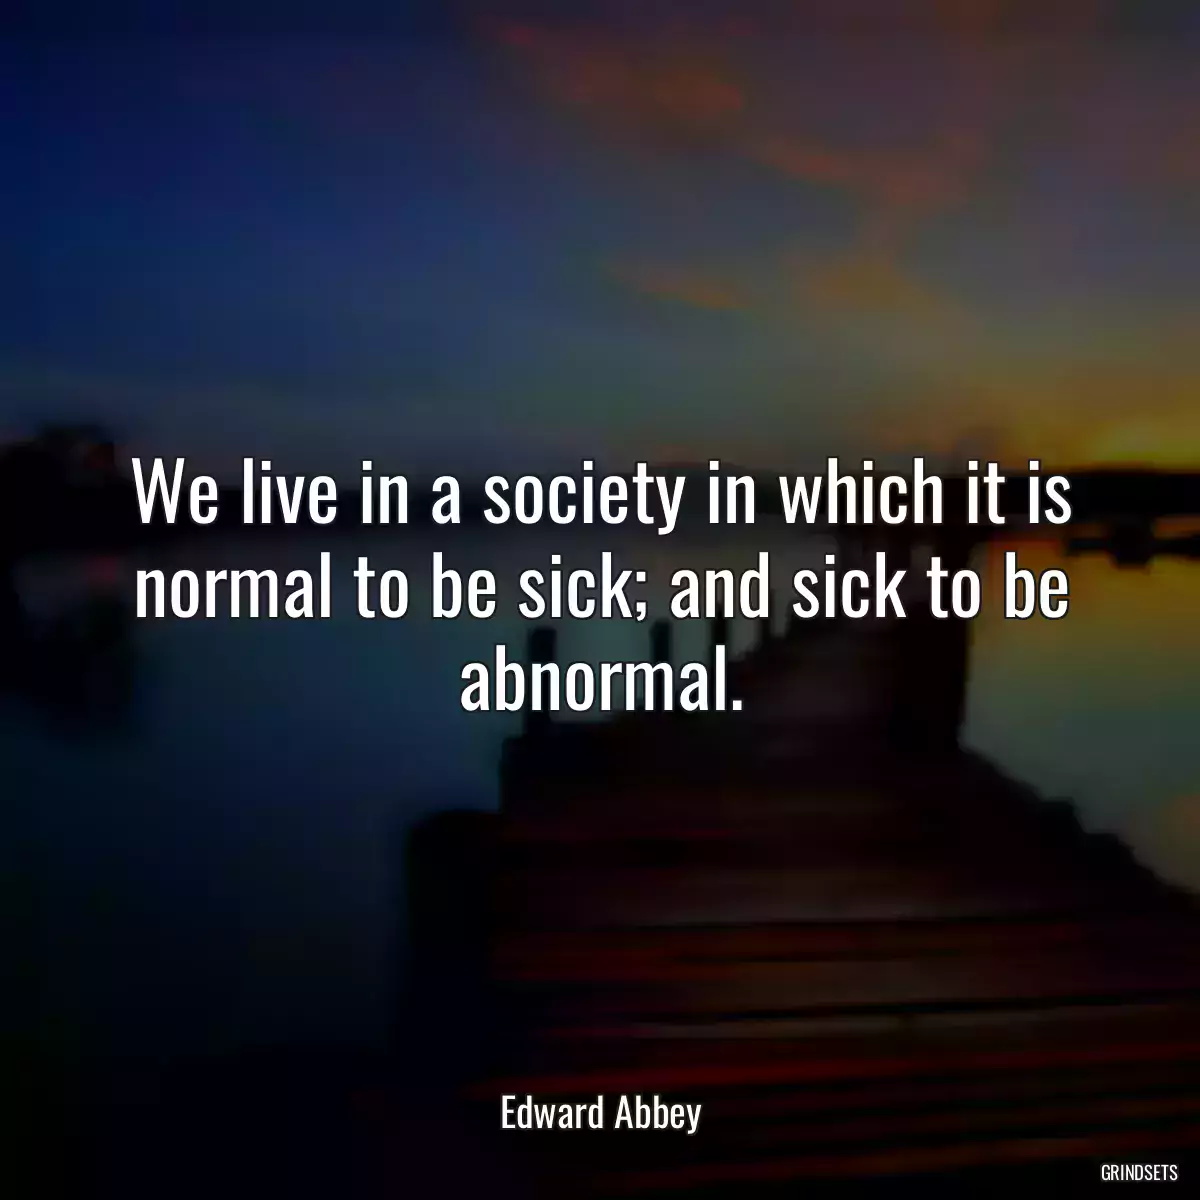 We live in a society in which it is normal to be sick; and sick to be abnormal.